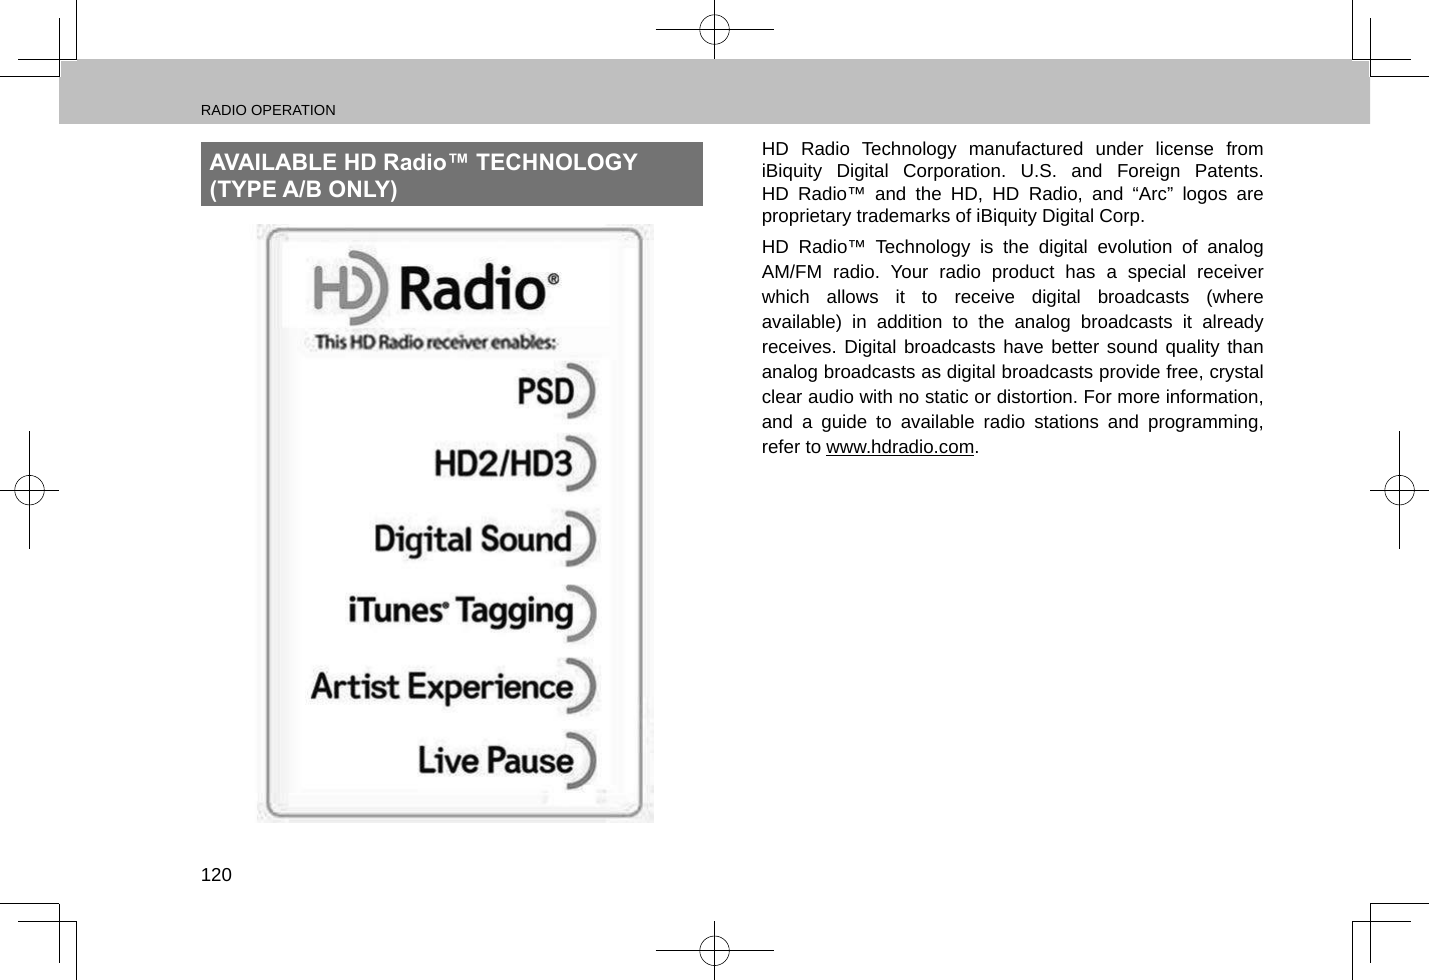 RADIO OPERATION120AVAILABLE HD Radio™ TECHNOLOGY (TYPE A/B ONLY)HD Radio Technology manufactured under license from iBiquity Digital Corporation. U.S. and Foreign Patents. HD Radio™ and the HD, HD Radio, and “Arc” logos are proprietary trademarks of iBiquity Digital Corp.HD Radio™ Technology is the digital evolution of analog AM/FM radio. Your radio product has a special receiver which allows it to receive digital broadcasts (where available) in addition to the analog broadcasts it already receives. Digital broadcasts have better sound quality than analog broadcasts as digital broadcasts provide free, crystal clear audio with no static or distortion. For more information, and a guide to available radio stations and programming, refer to www.hdradio.com.